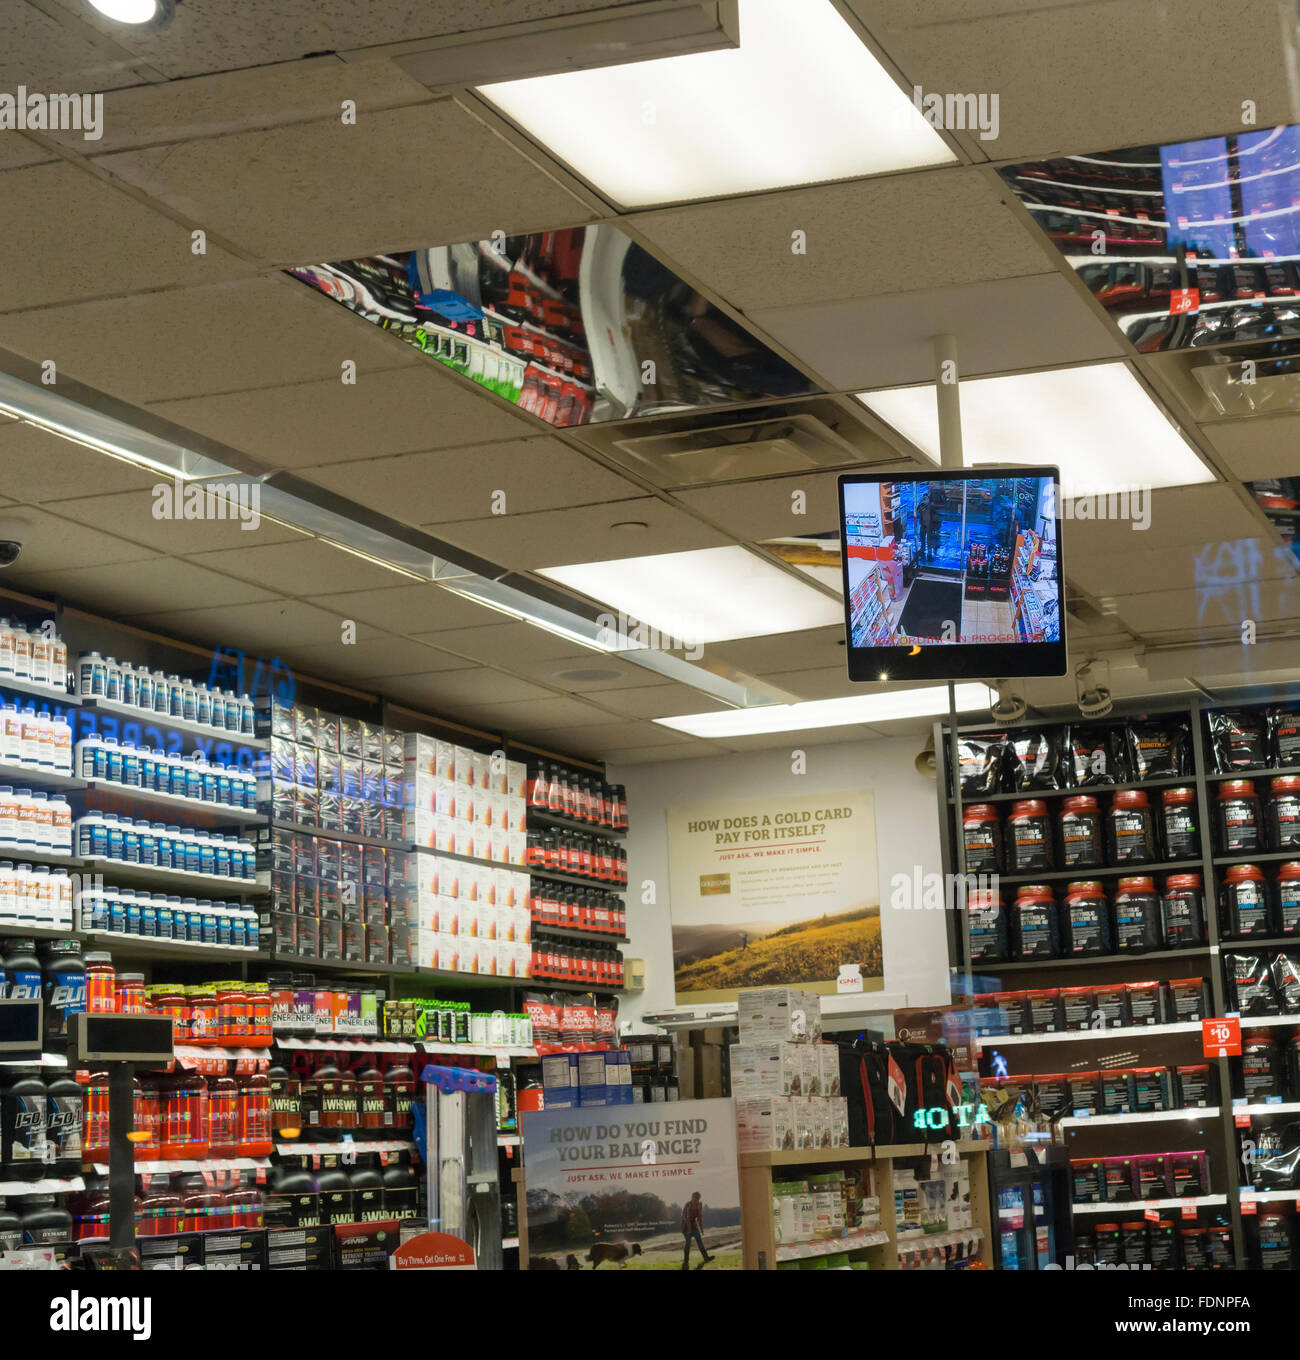 A monitor shows the video feed of security cameras in a store in New York  on Tuesday, January 26, 2016. (© Richard B. Levine Stock Photo - Alamy